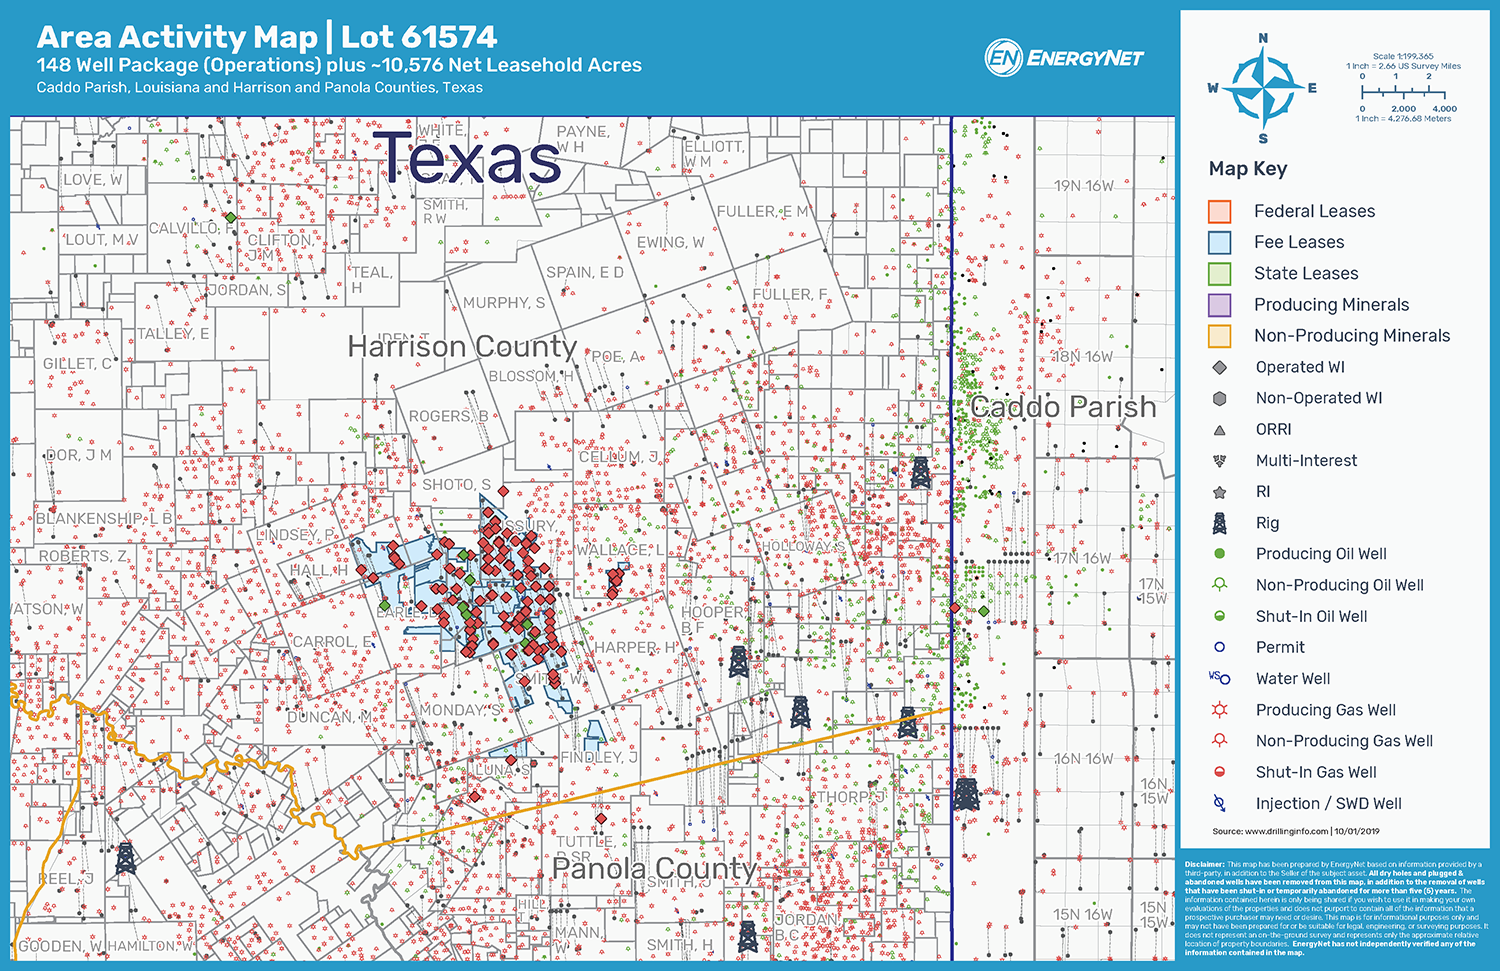 East Texas Exploration 148 Well Package Asset Map (Source: EnergyNet)